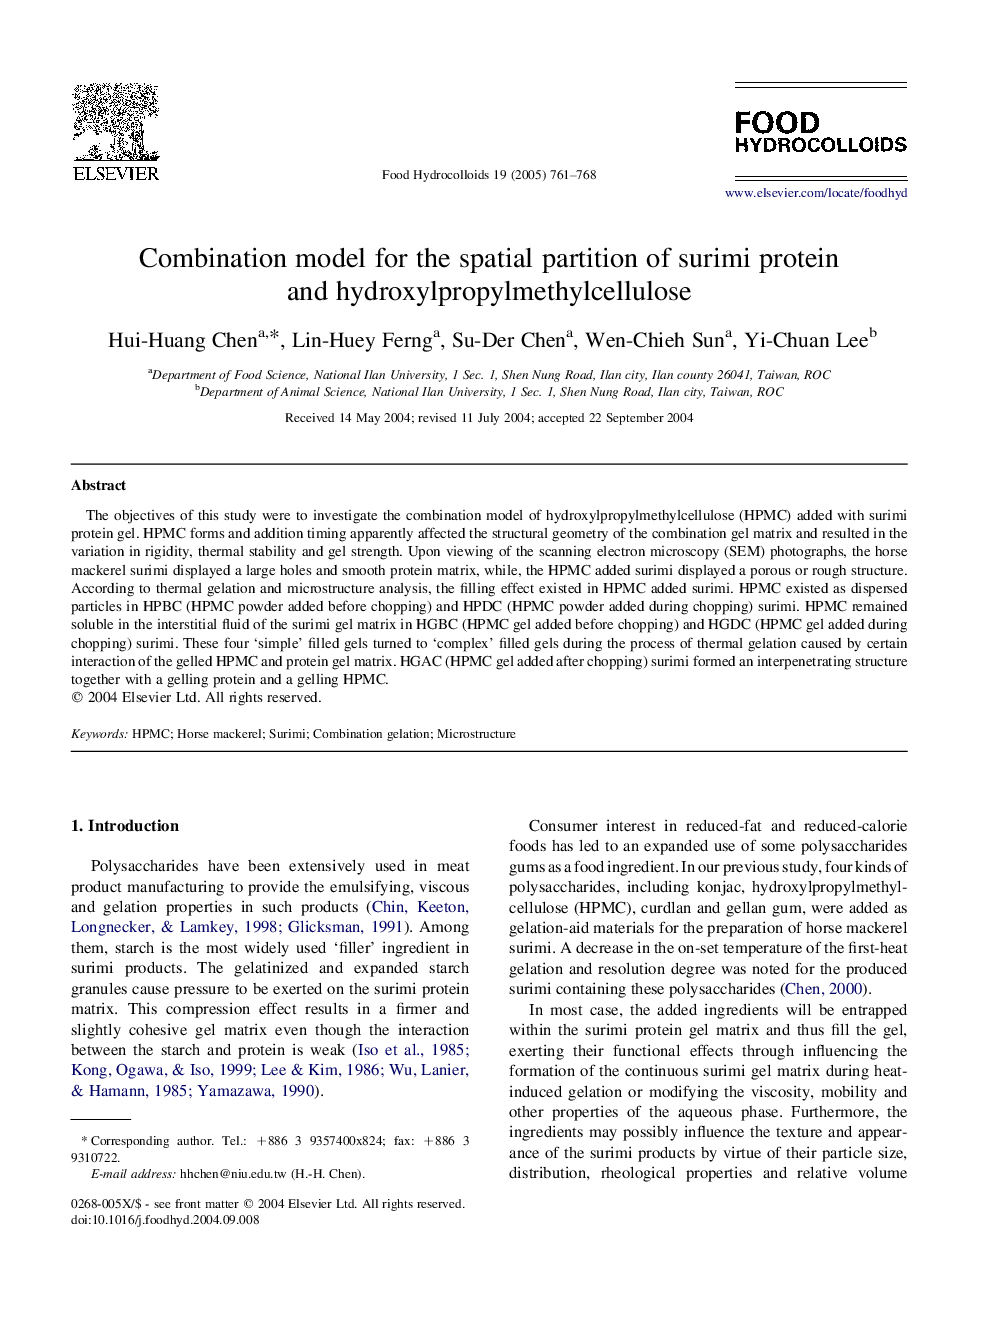 Combination model for the spatial partition of surimi protein and hydroxylpropylmethylcellulose